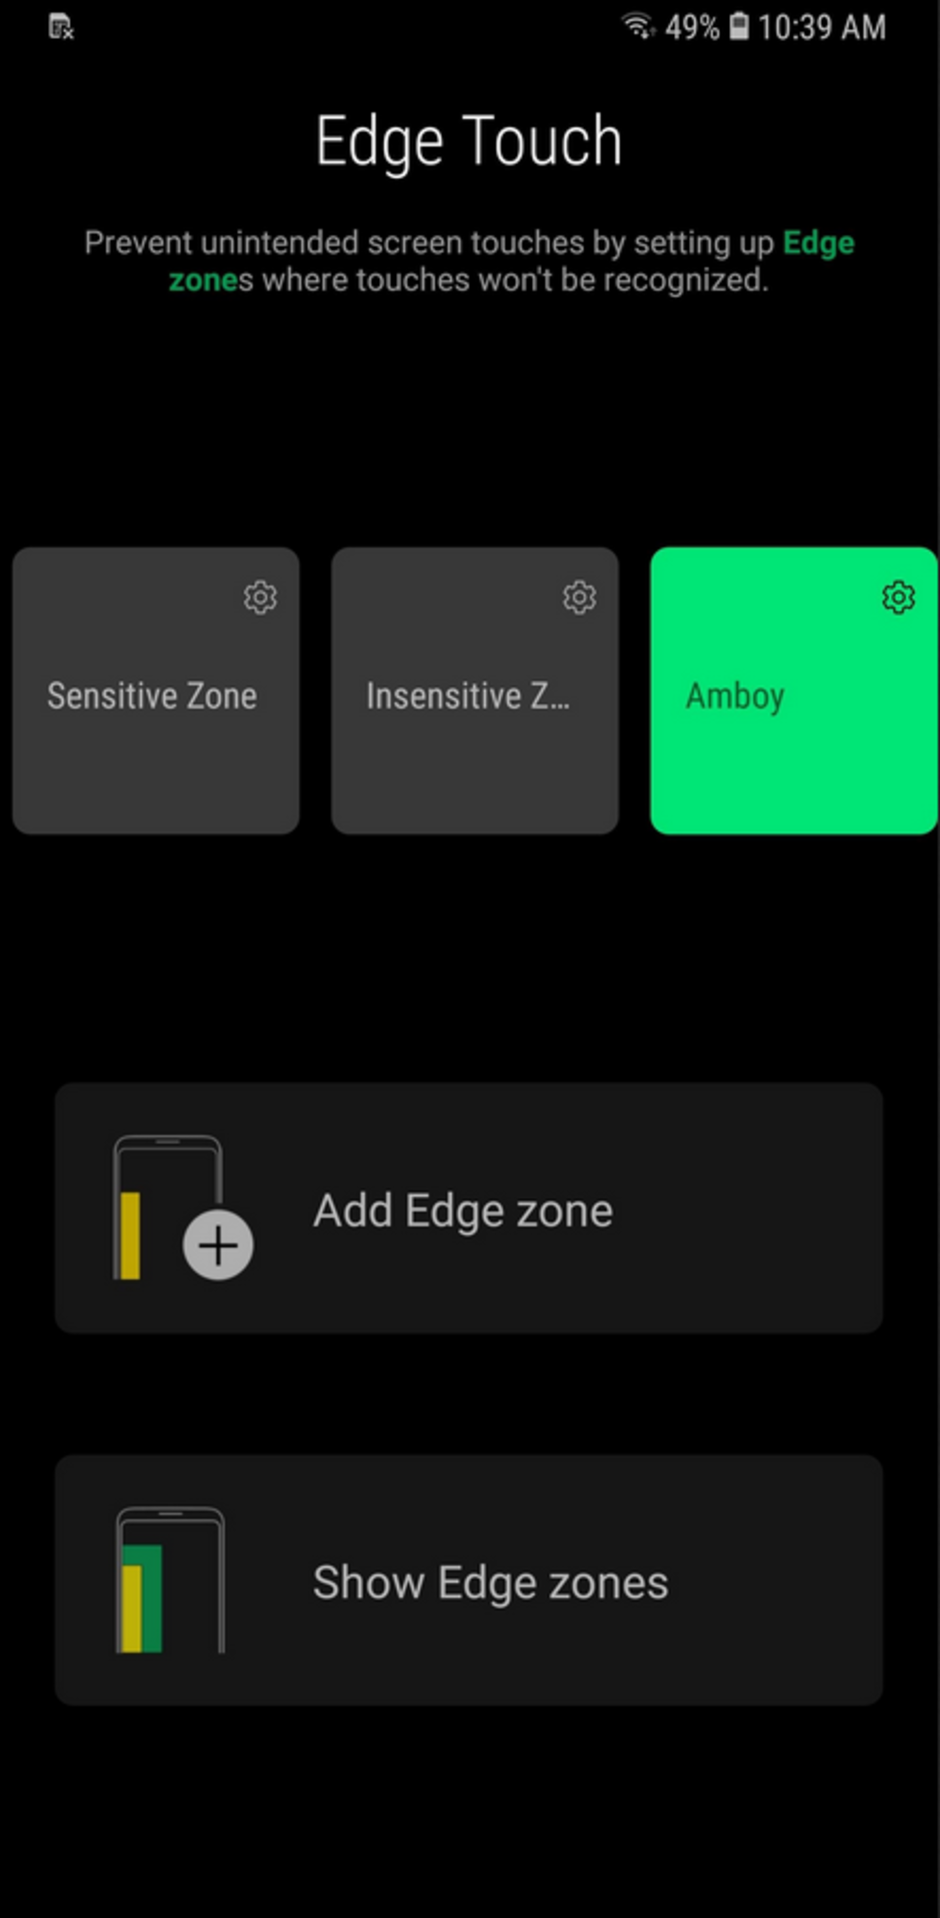 Samsung&#039;s Edge Touch app can prevent you from accidentally touching your curved edge display - Samsung&#039;s own app helps solve a common problem with the Galaxy S10, S10+ and other models